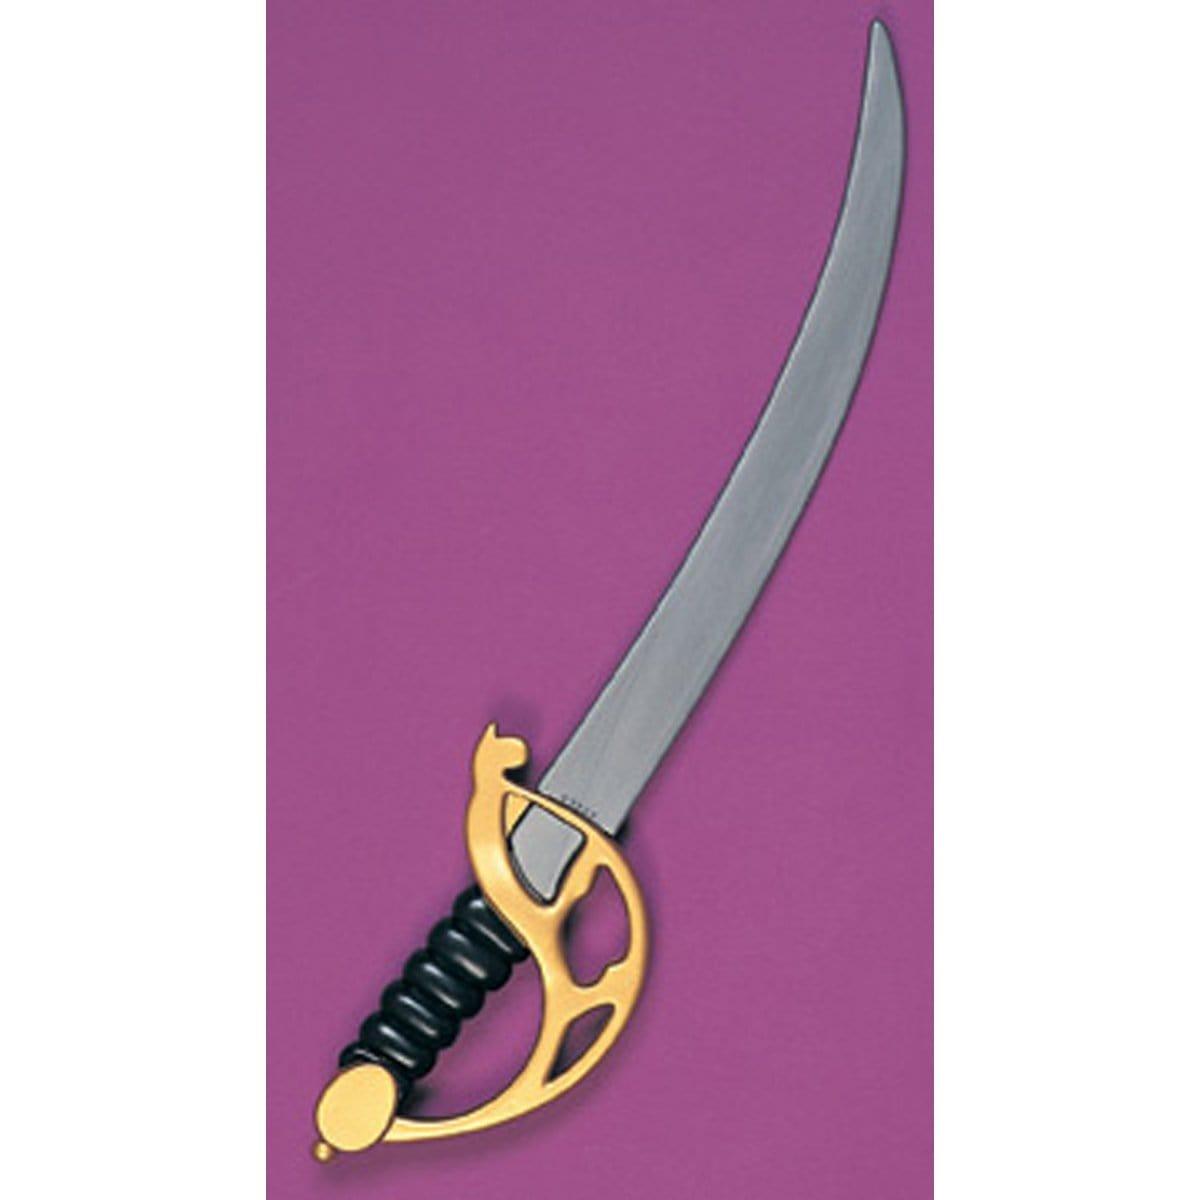 Buy Costume Accessories Deluxe pirate sword sold at Party Expert